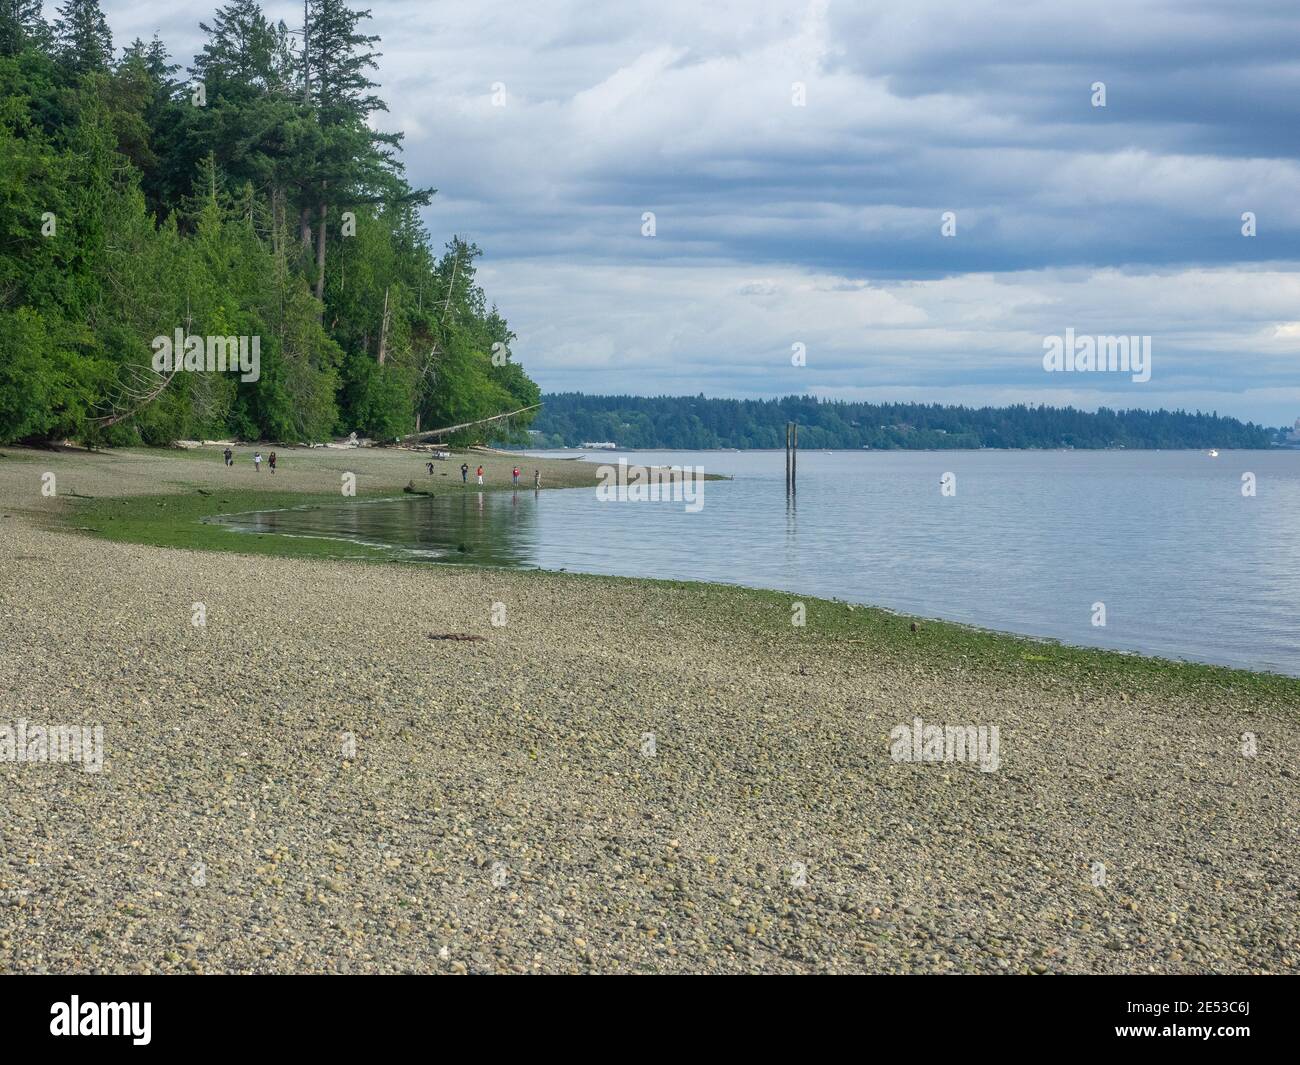 Burfoot Park is a public park located in Thurston County, Washington. Burfoot Park covers 50 acres of property with 1,100 feet of saltwater beach fron Stock Photo